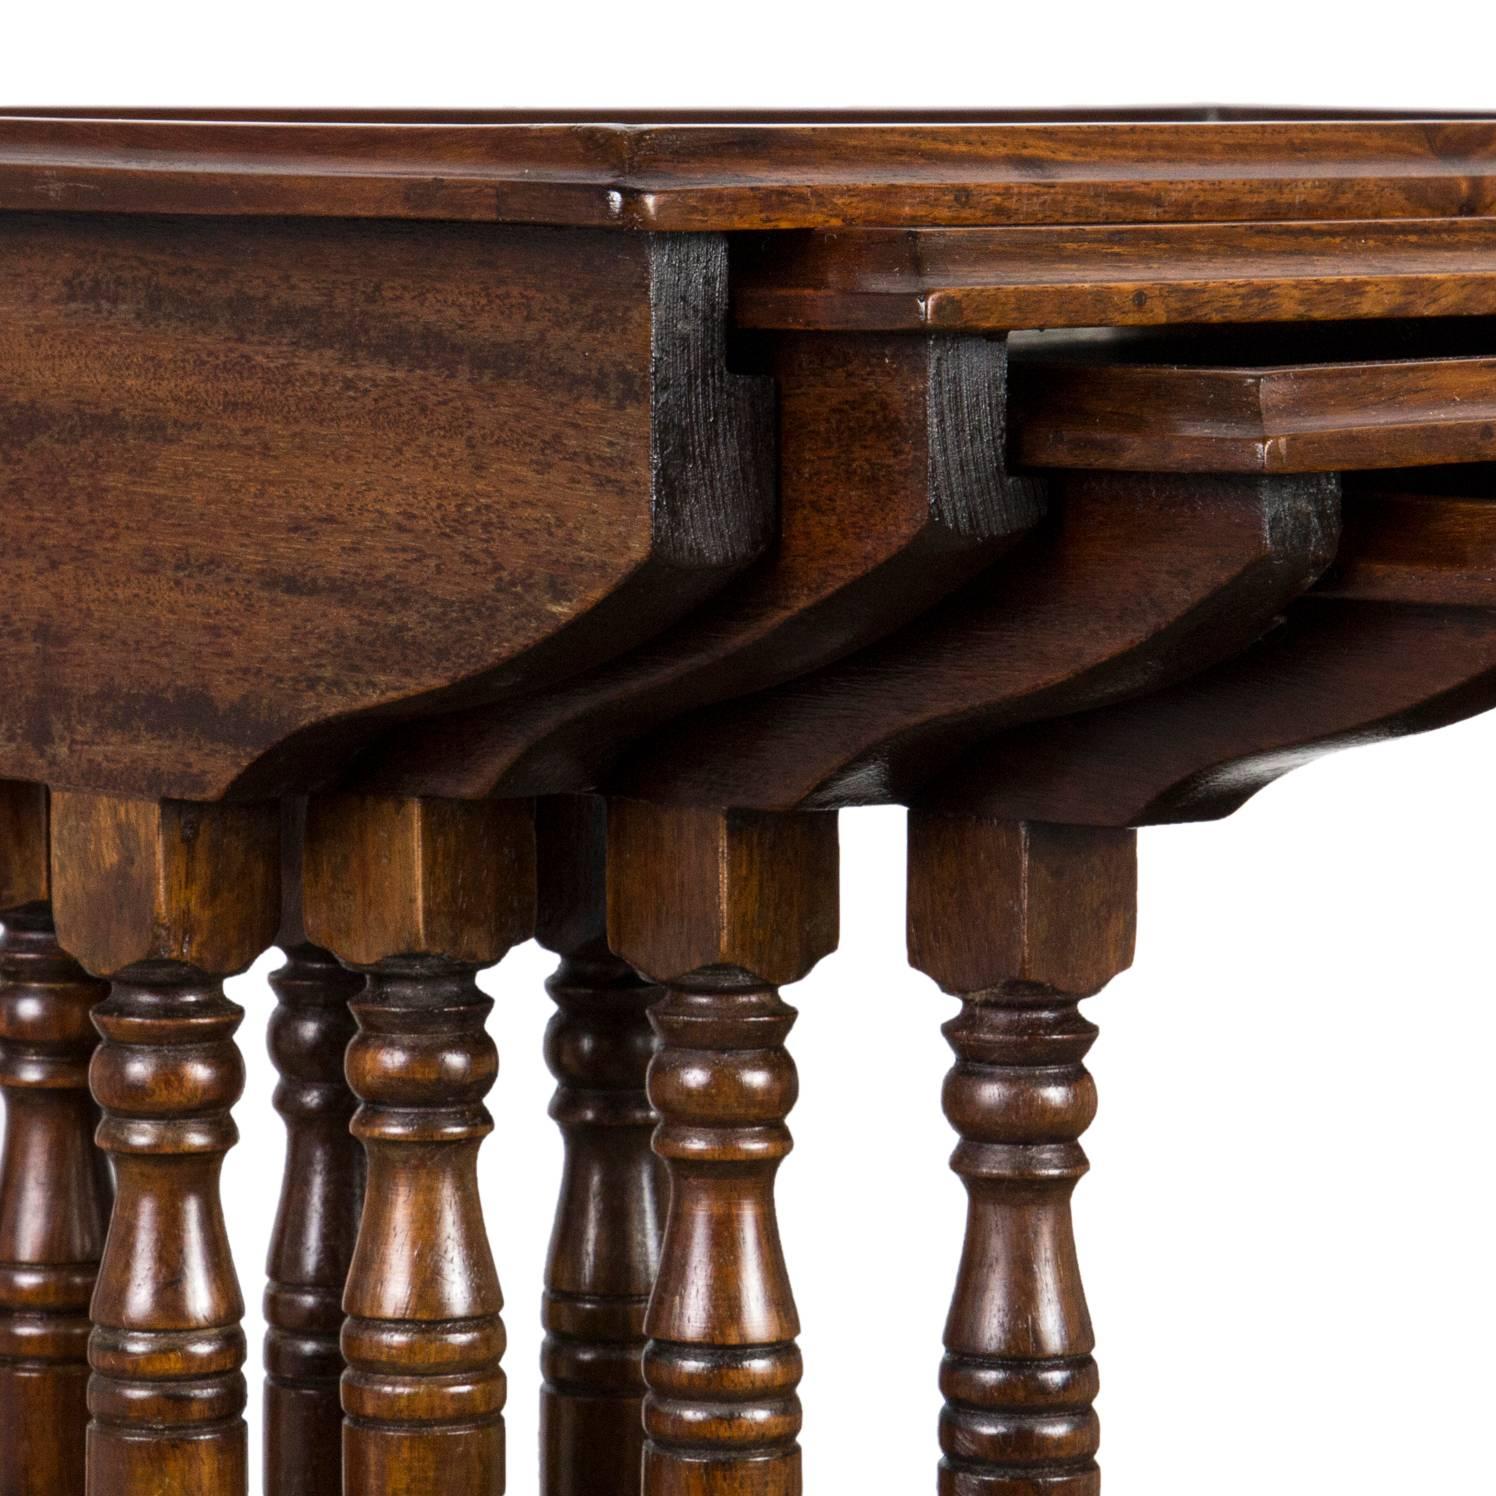 An unusual and fine quality Anglo-Indian quartetto nest of tables, in padouk or similar hardwood, the top table having an eye-catching mother-of-pearl inlaid motif. Each table is raised on elegant ring turned legs united by a stretcher at the rear.